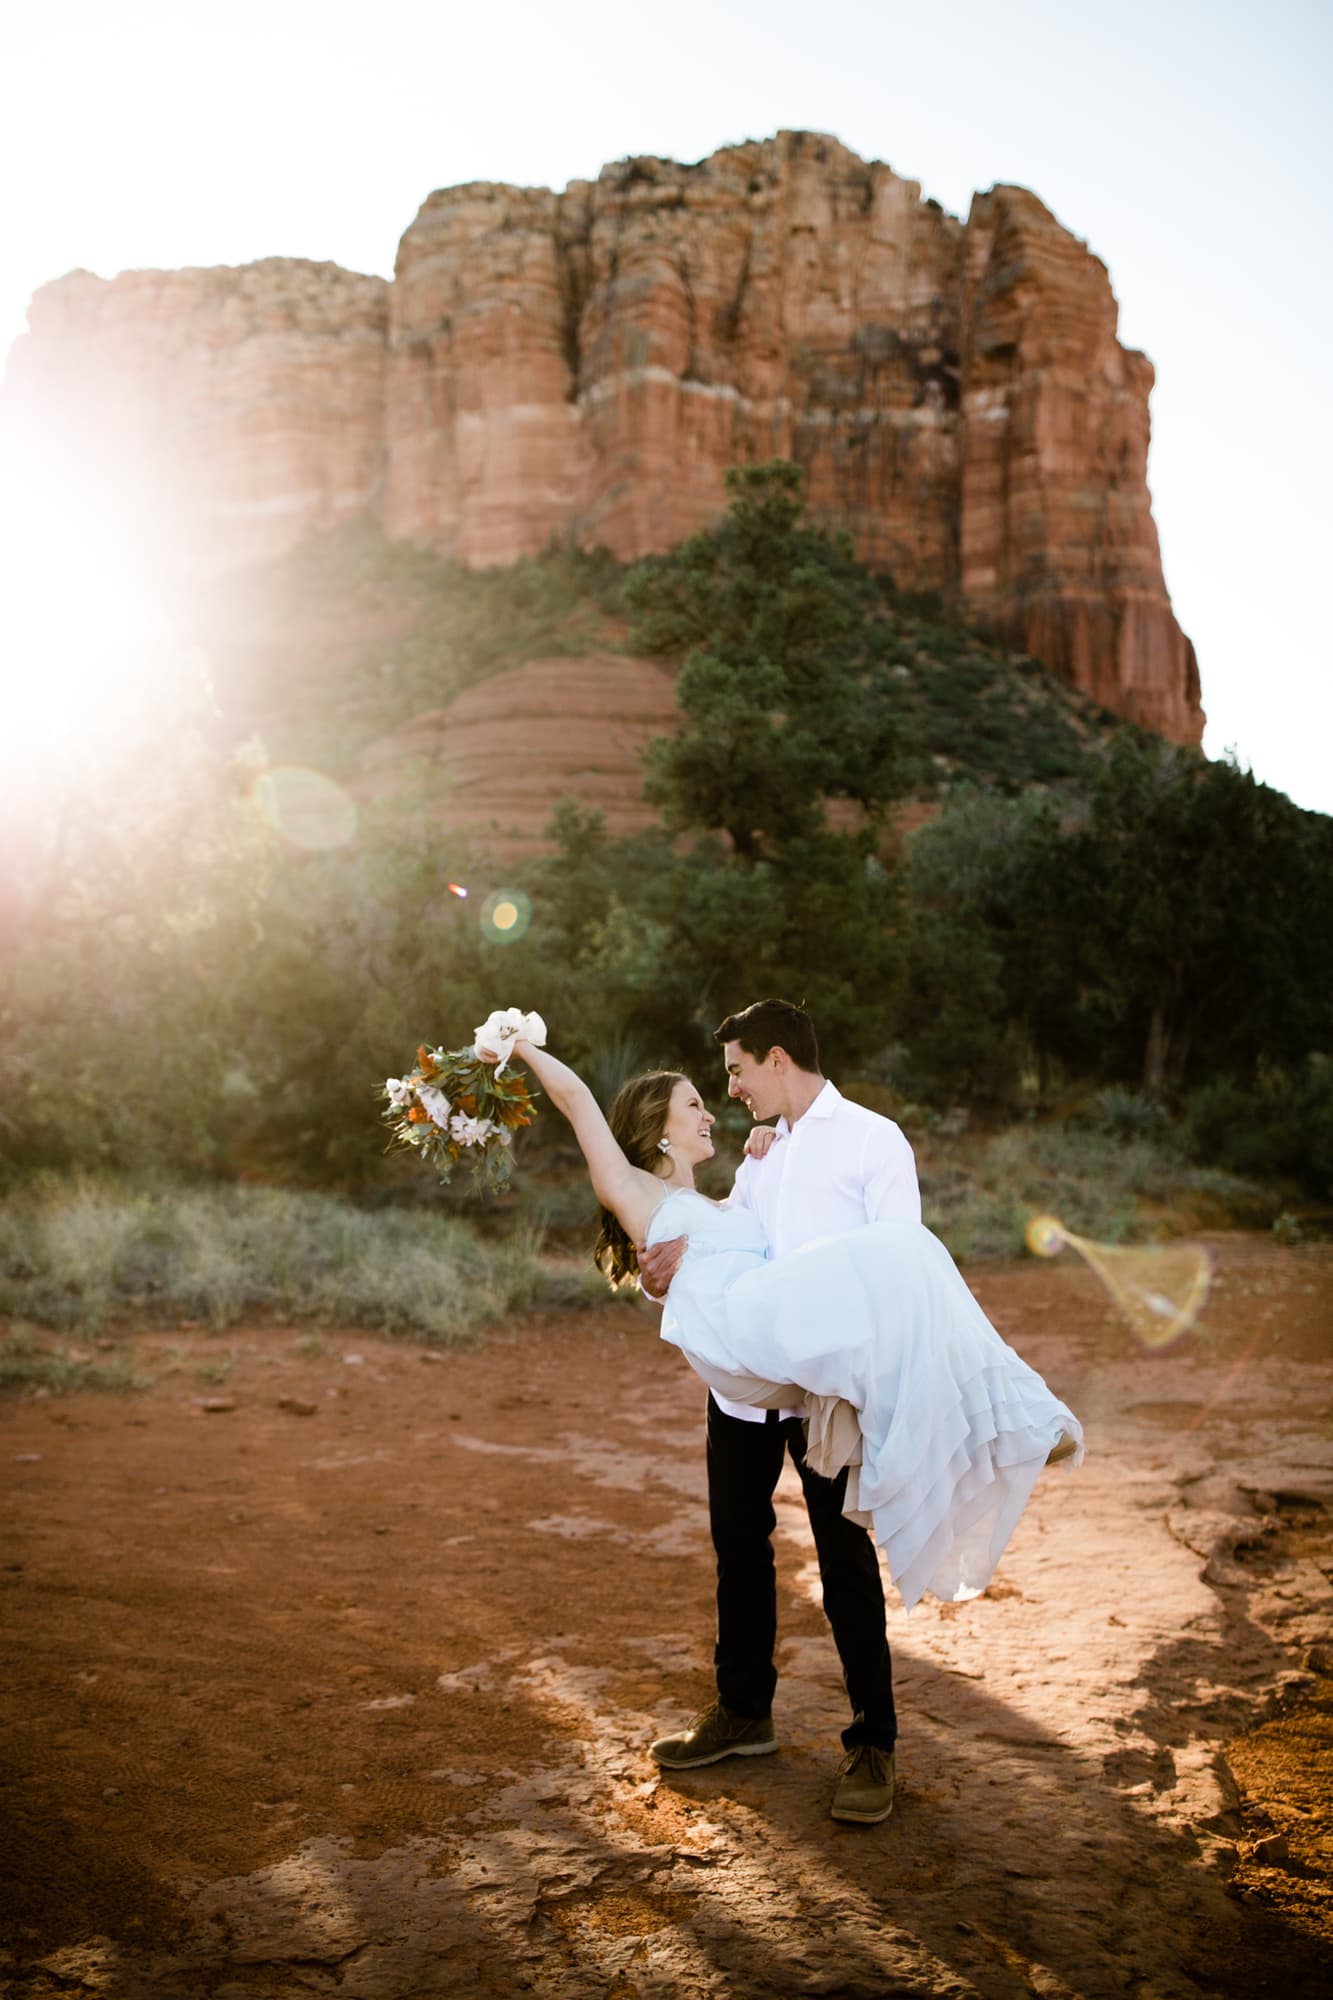 The groom picks up the bride. She holds her bouquet over her head and the sun shines behind them.